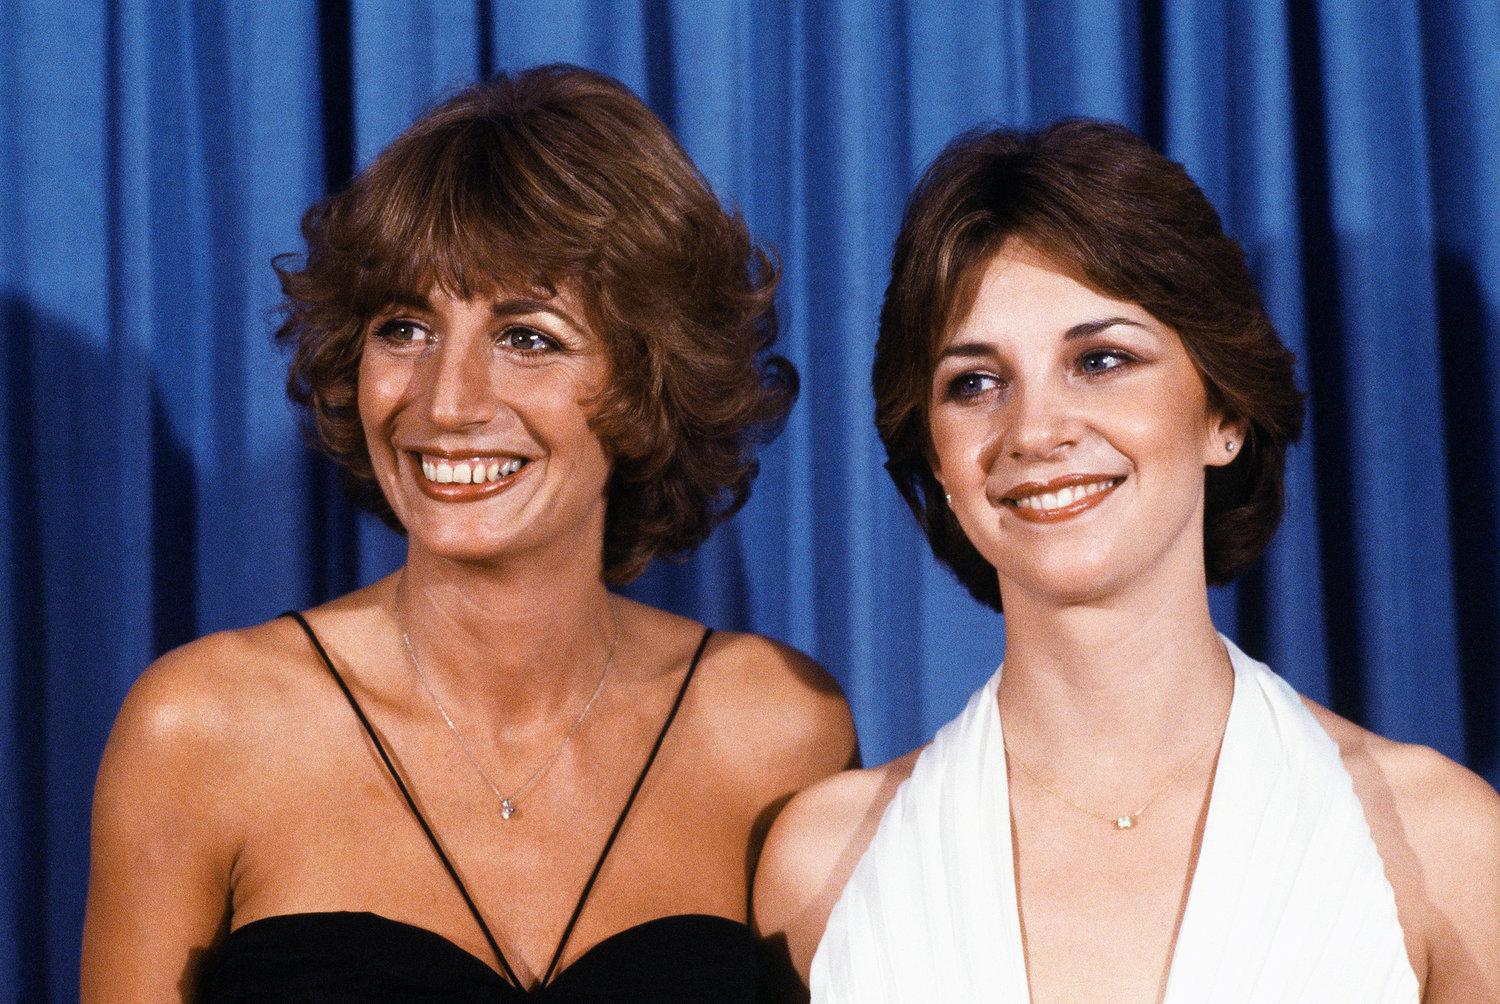 Penny Marshall, left, and Cindy Williams from the comedy series "Laverne & Shirley" appear at the Emmy Awards in Los Angeles on Sept. 9, 1979. Williams, who played Shirley opposite Marshall's Laverne on the popular sitcom "Laverne & Shirley," died Wednesday, Jan. 25, 2023, in Los Angeles at age 75, her family said Monday, Jan. 30.